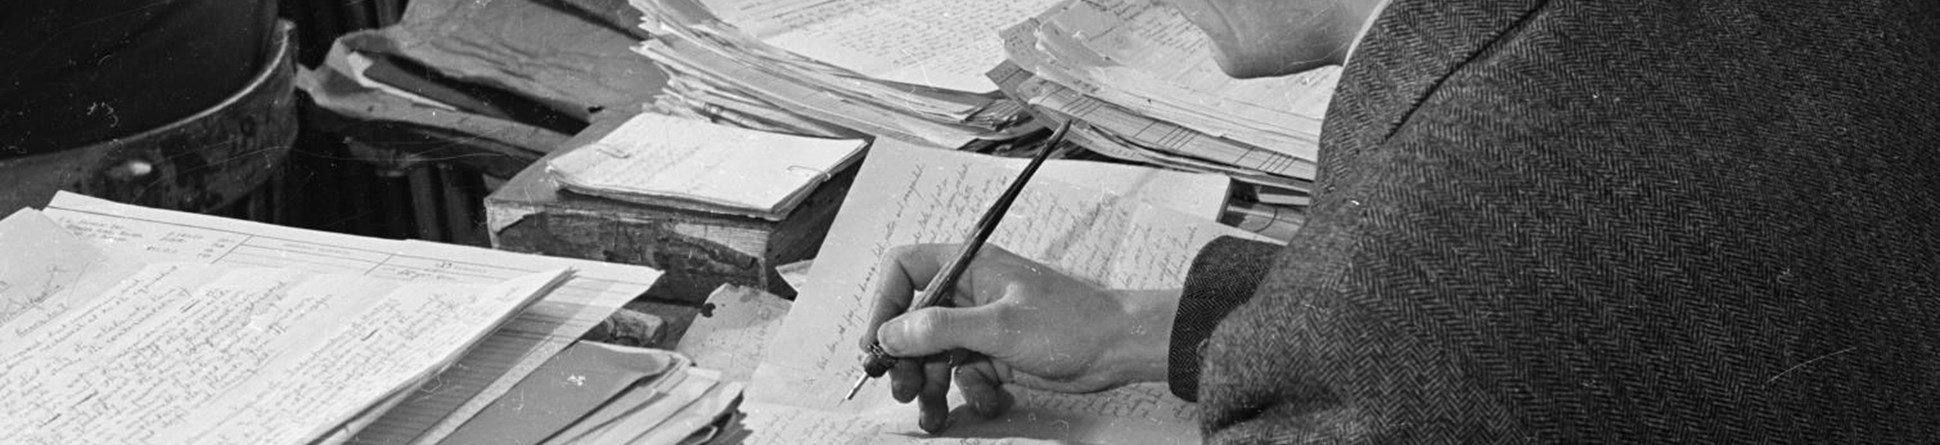 A man wearing a suit writing at desk surround by piles of paper